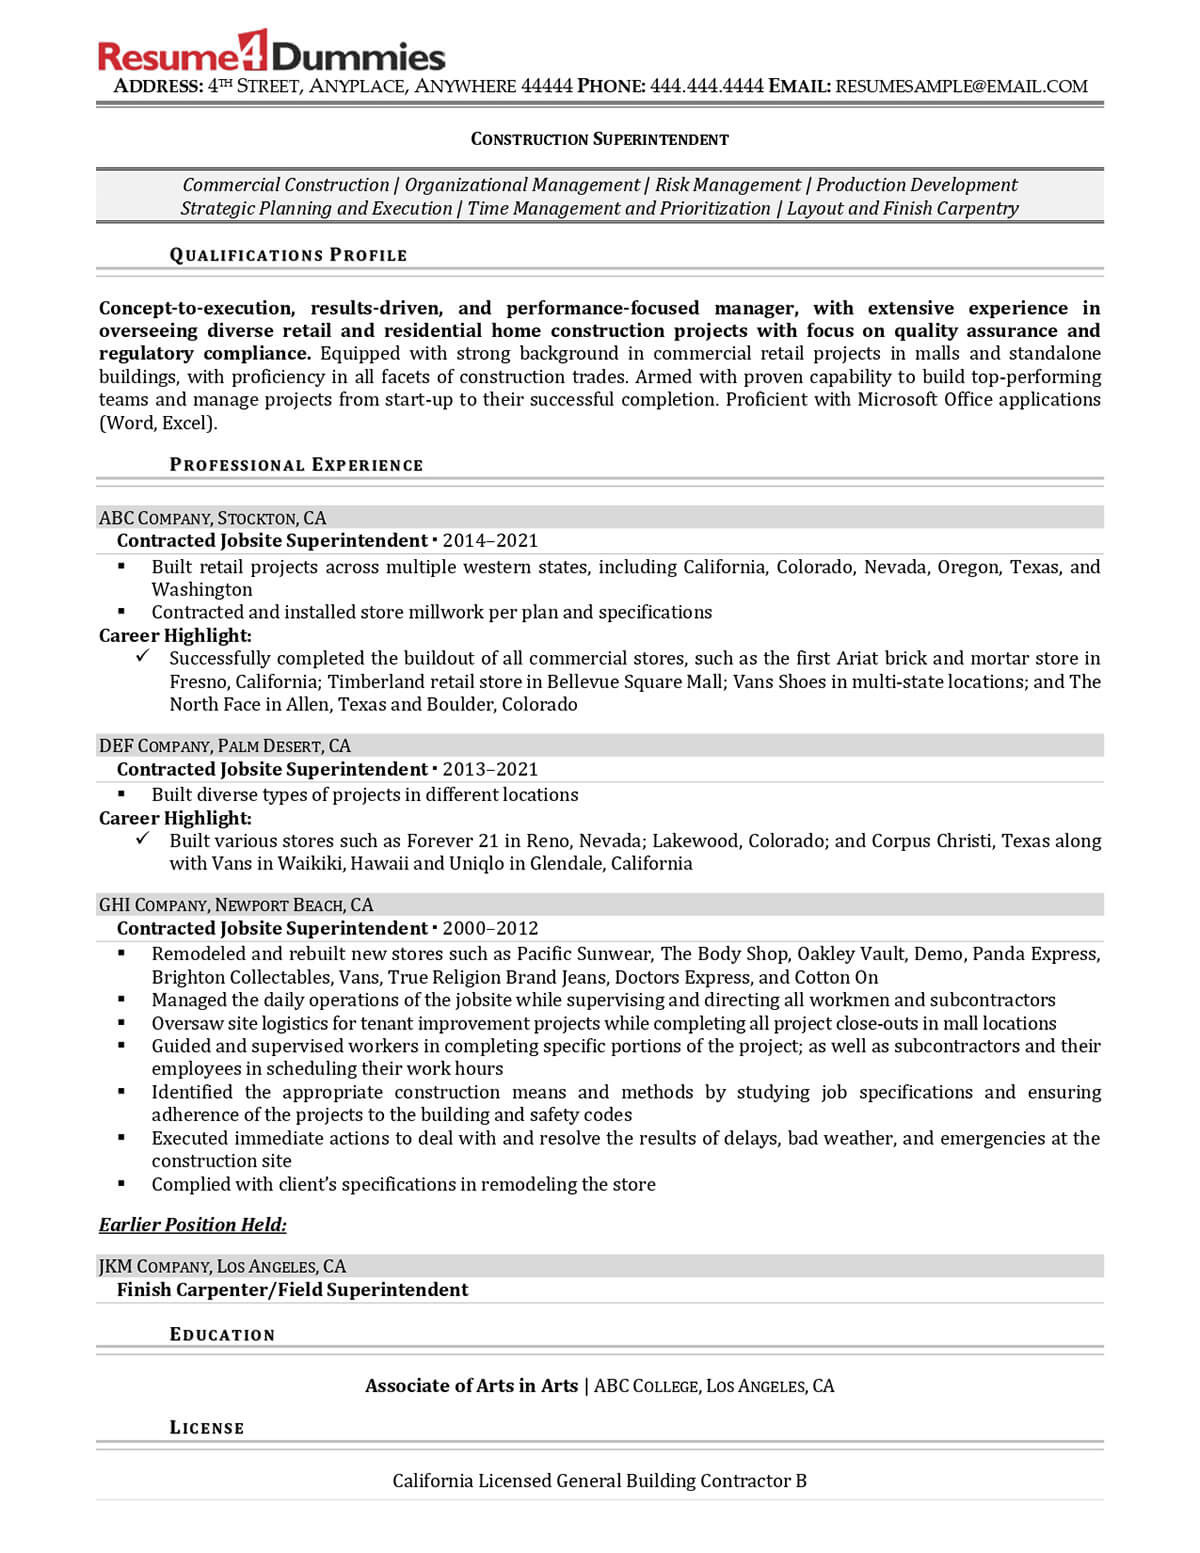 Free Sample Resume for Building Superintendent Construction Superintendent Resume Example Resume4dummies